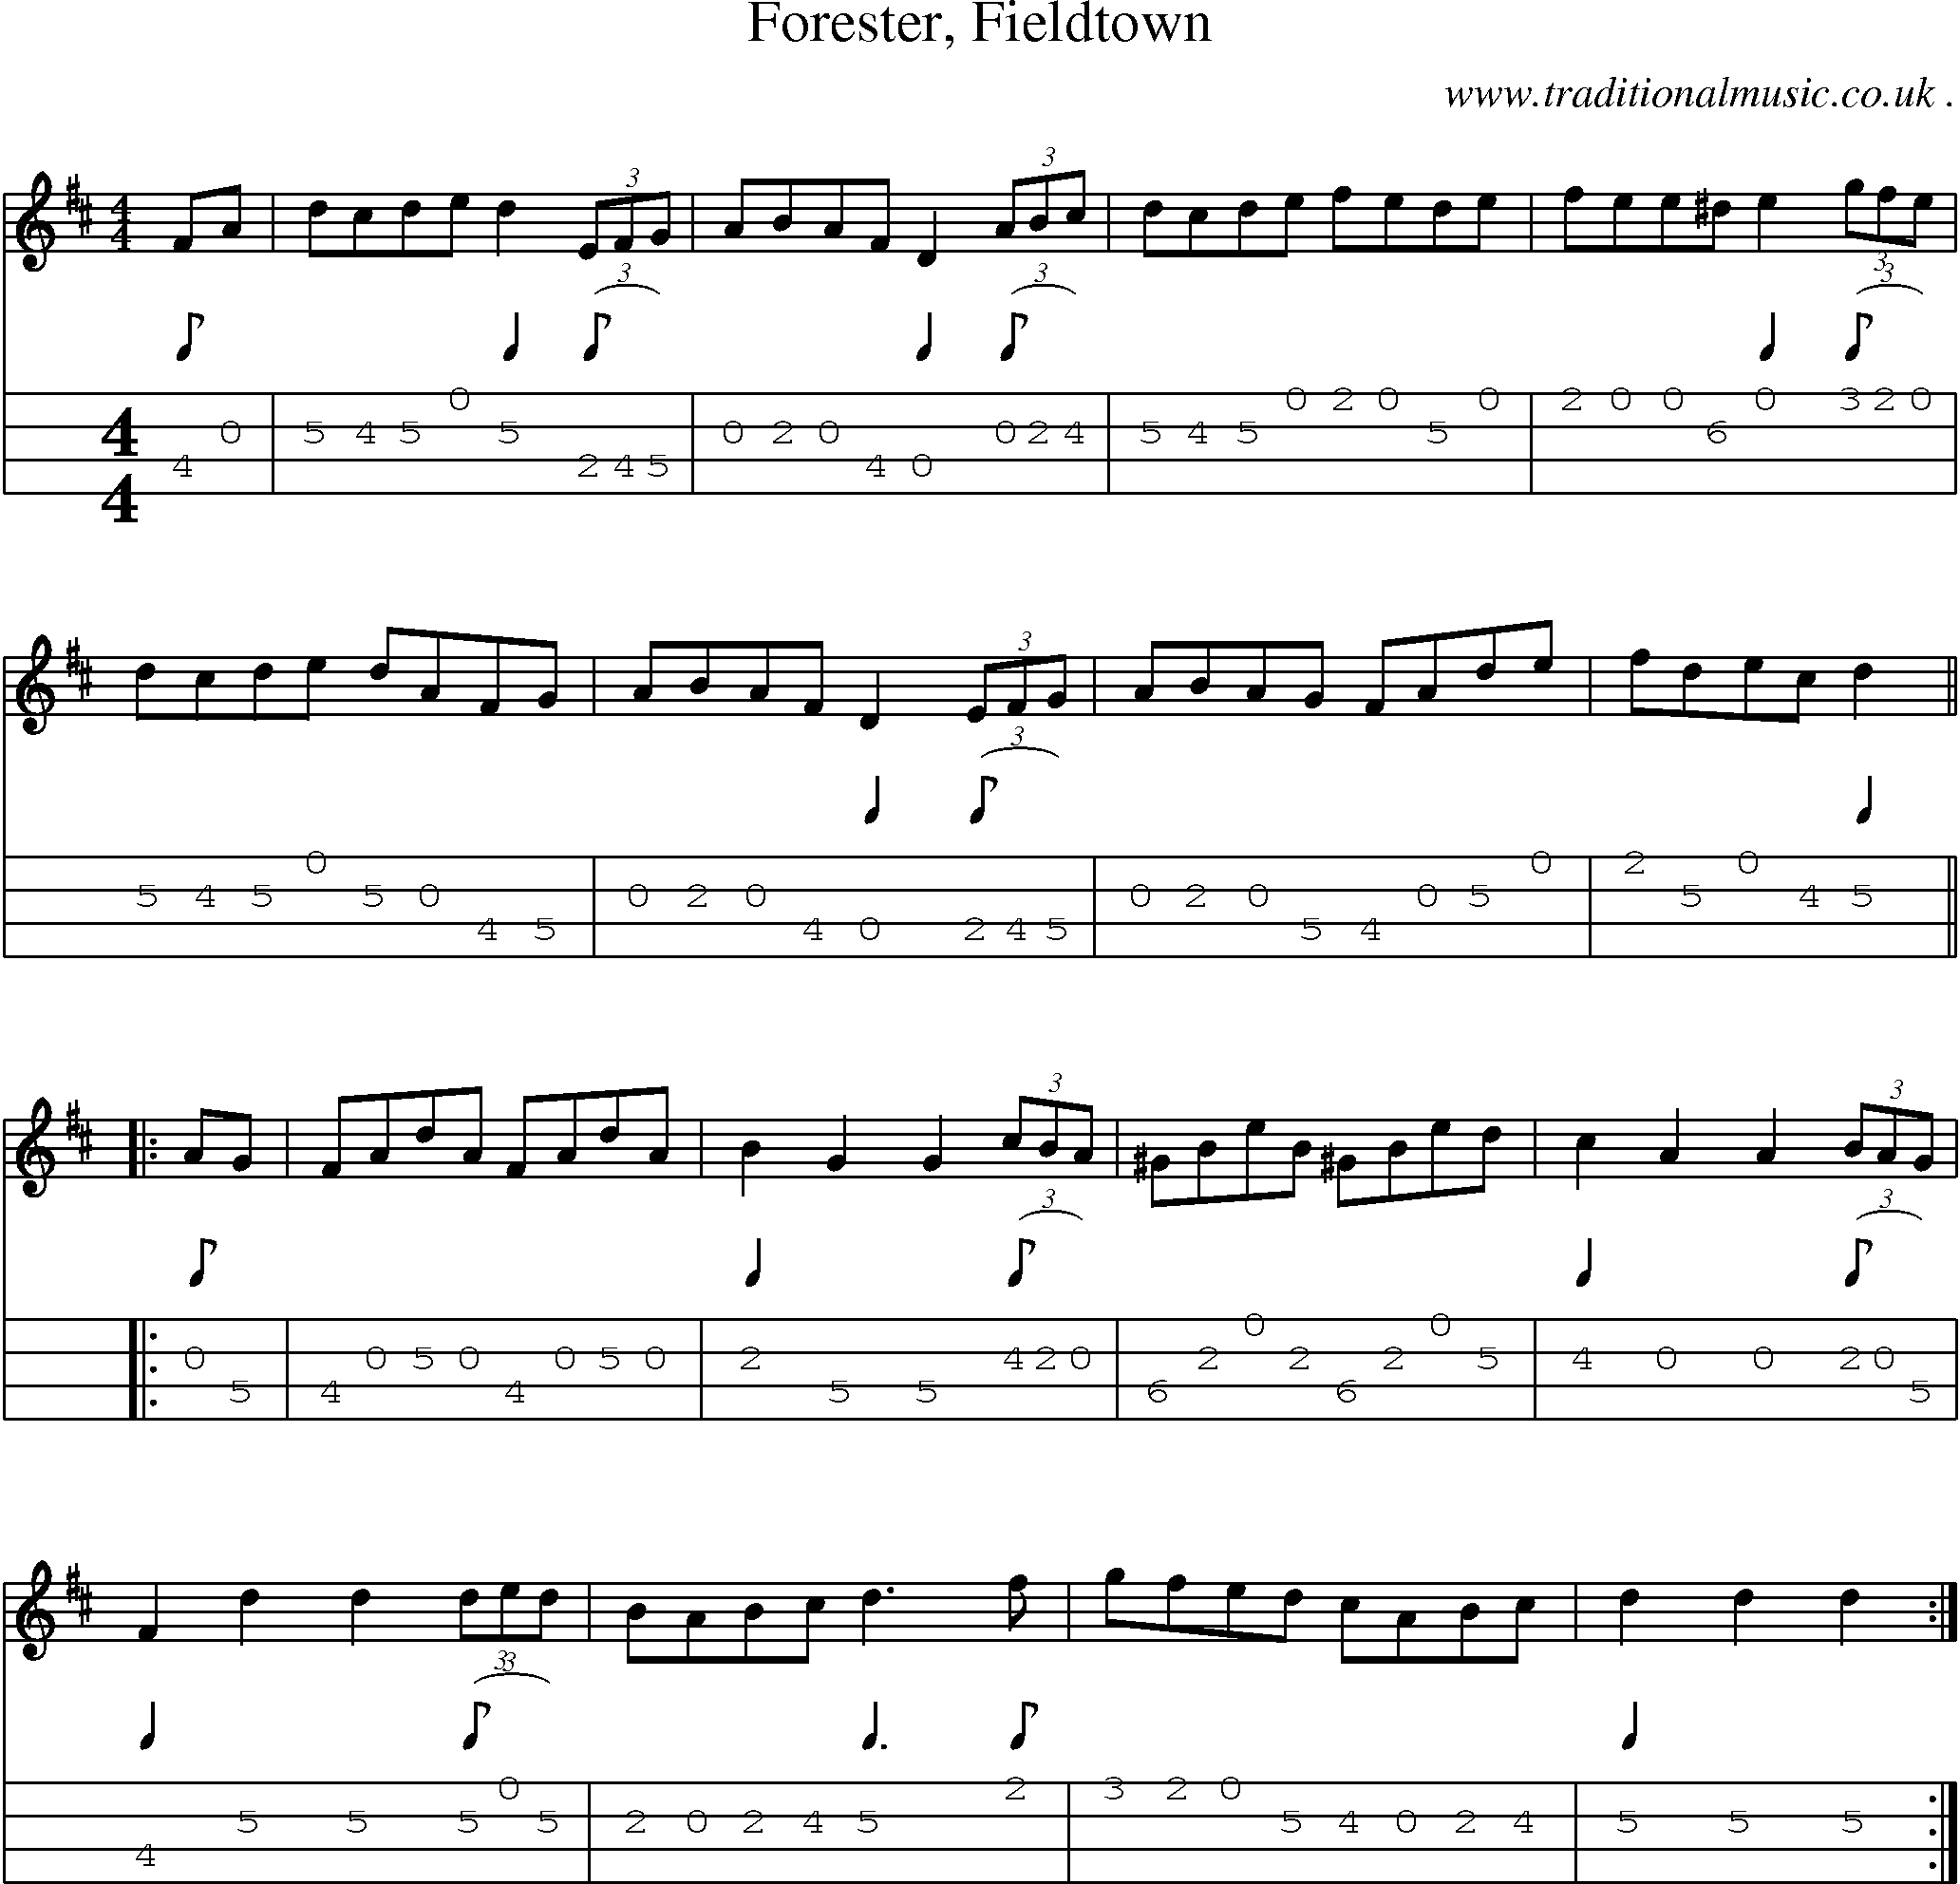 Sheet-Music and Mandolin Tabs for Forester Fieldtown